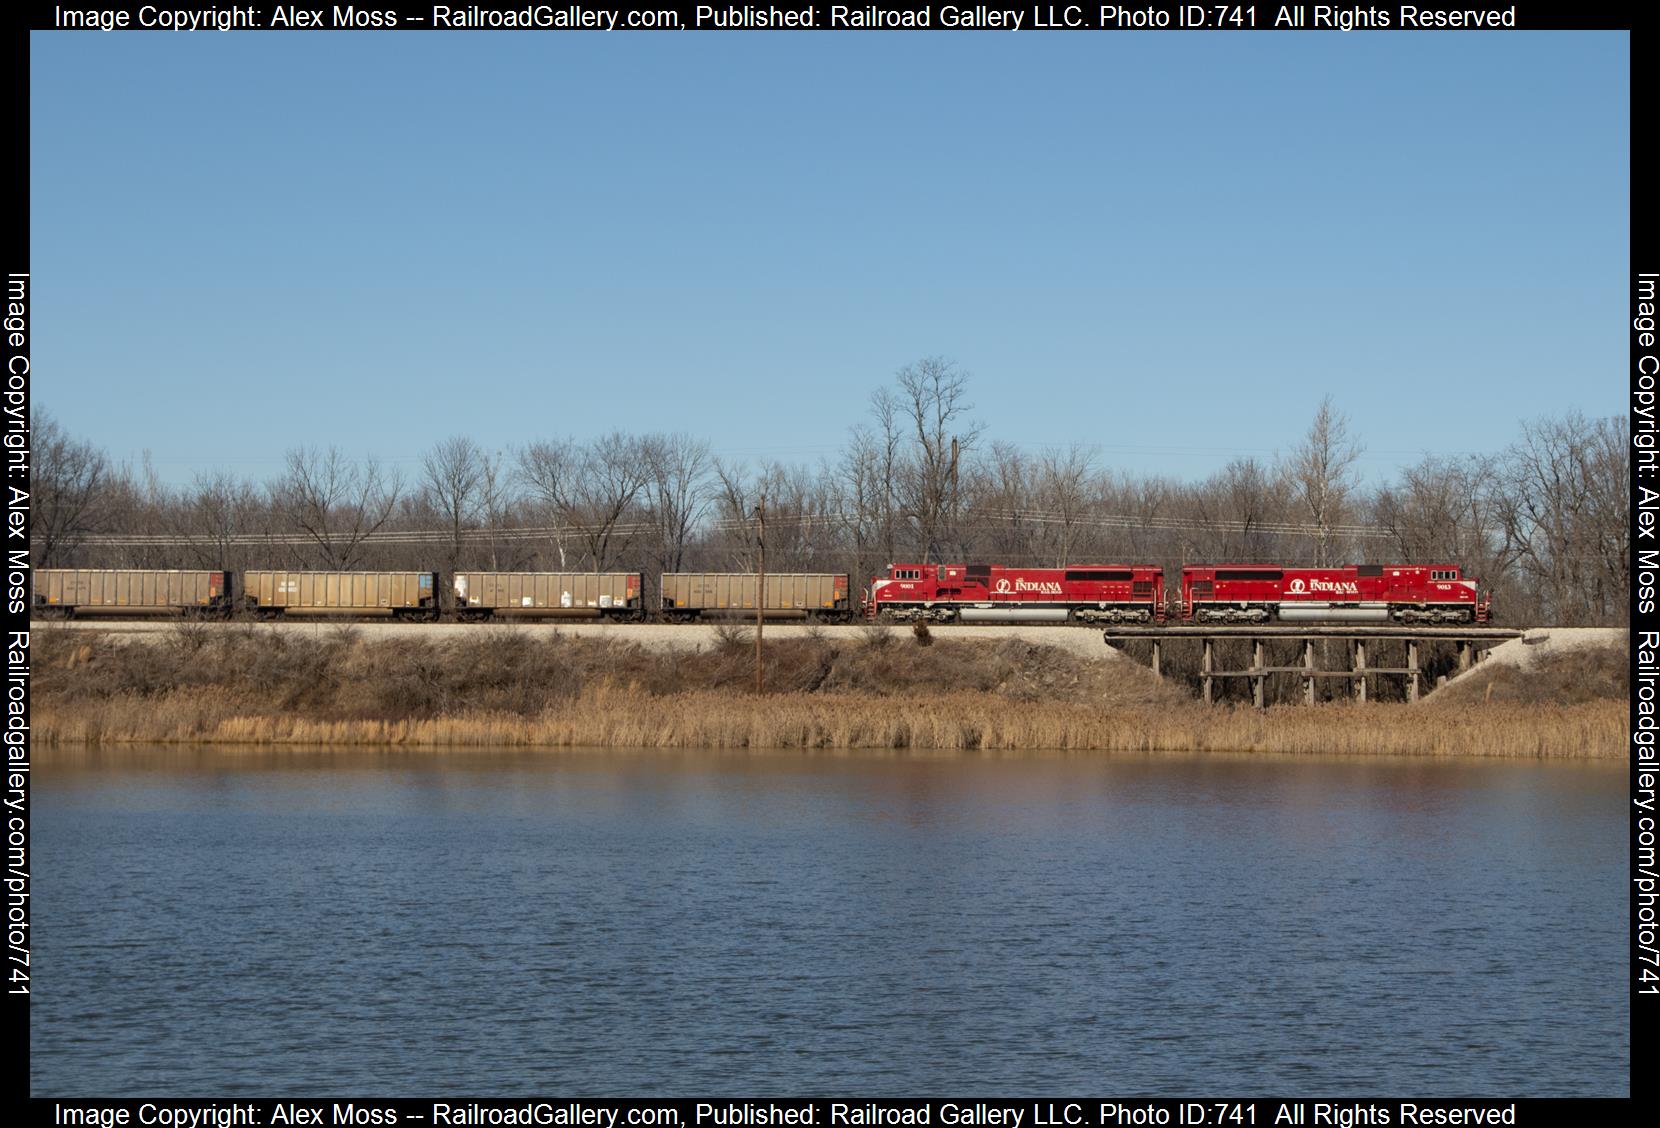 INRD 9013 is a class EMD SD9043MAC and  is pictured in Sullivan, Indiana, United States.  This was taken along the INRD Indianapolis Subdivision on the Indiana Rail Road. Photo Copyright: Alex Moss uploaded to Railroad Gallery on 02/23/2023. This photograph of INRD 9013 was taken on Sunday, February 12, 2023. All Rights Reserved. 